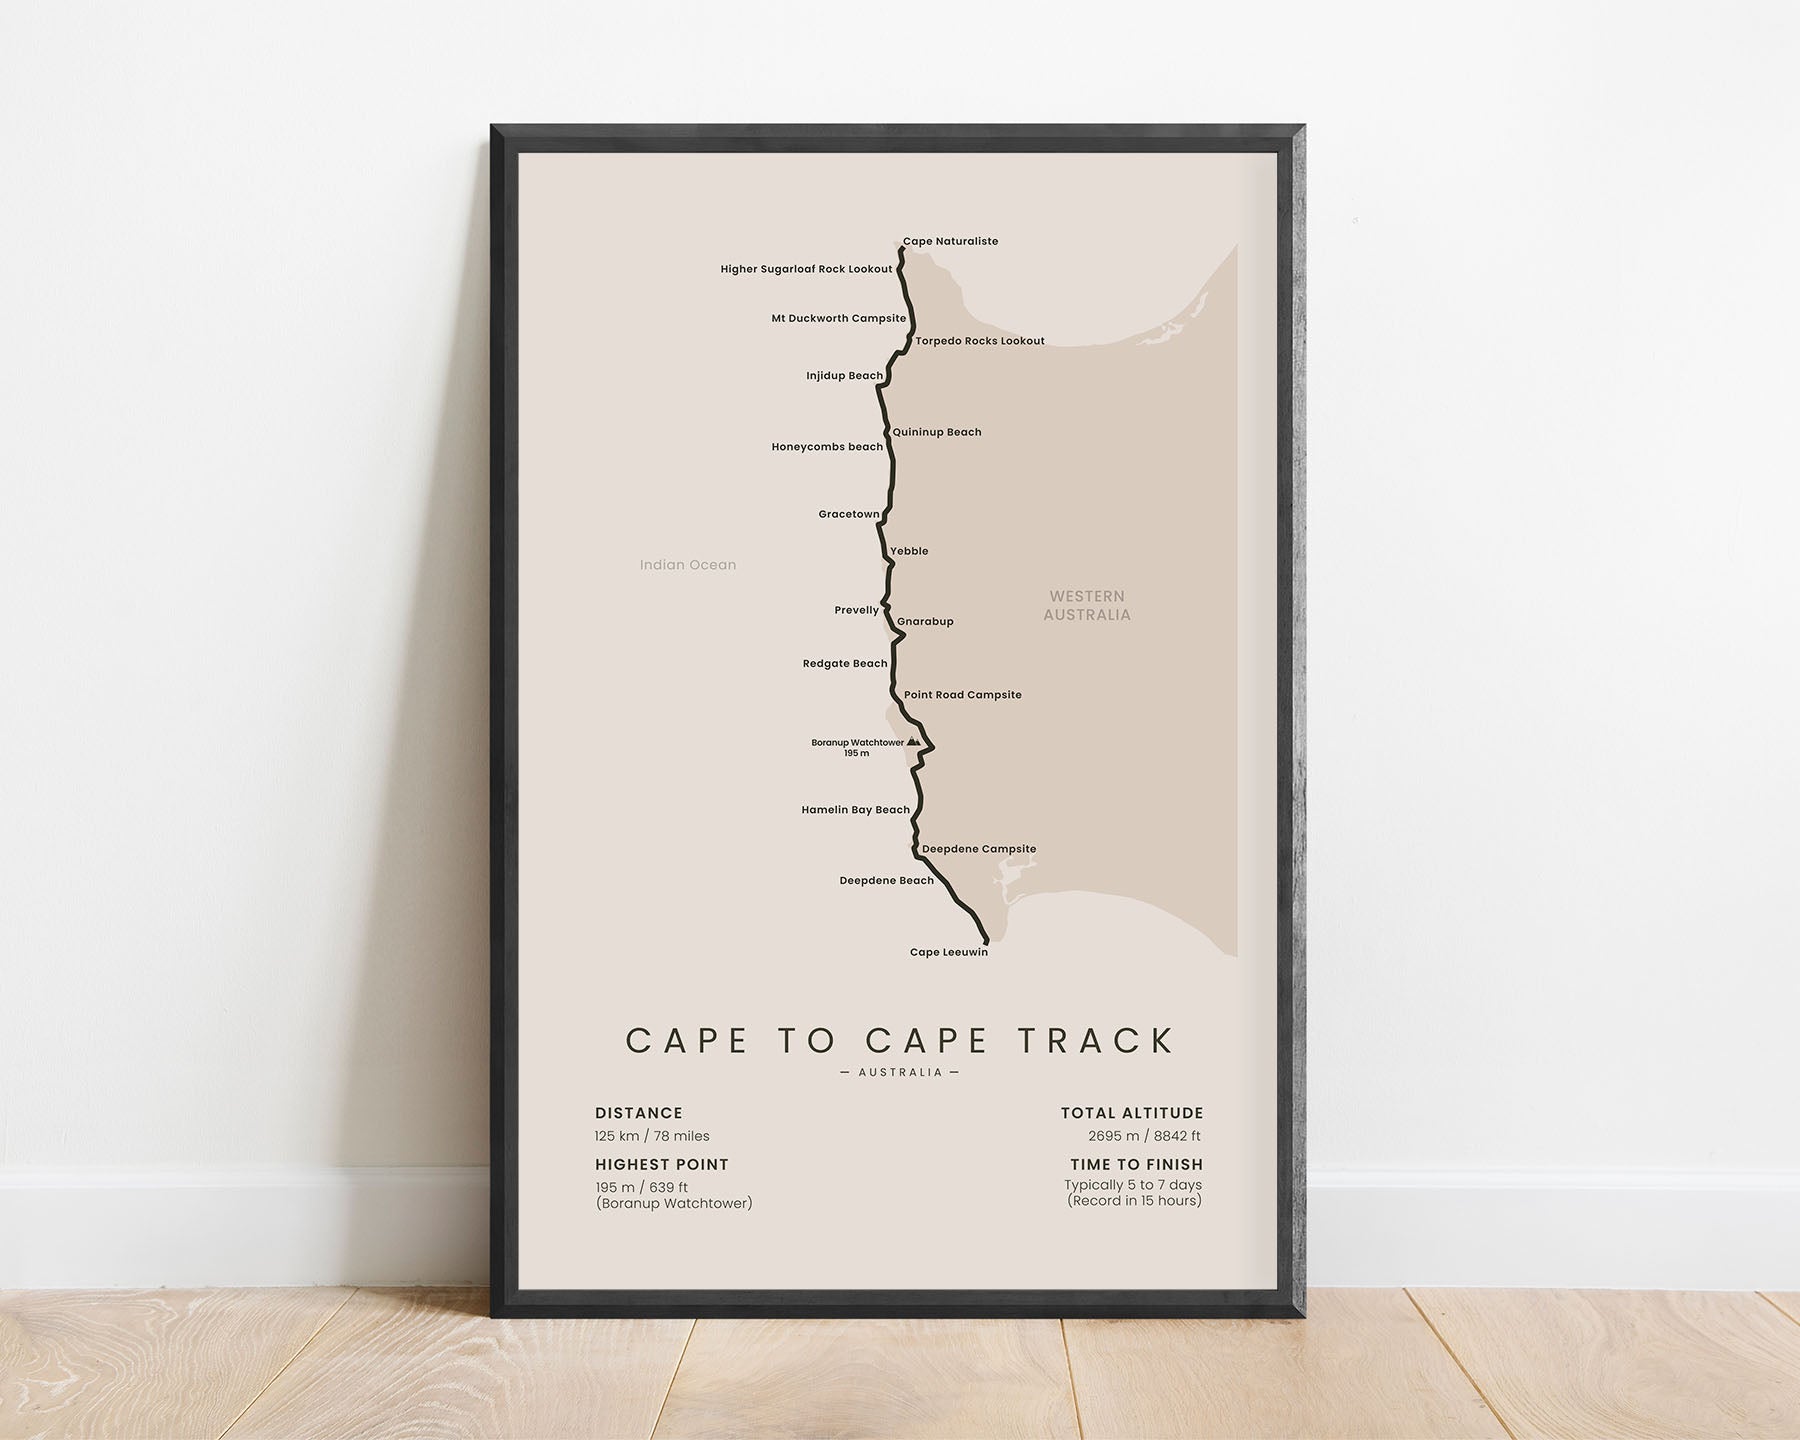 Cape to Cape Track (Australia) path map art with beige background